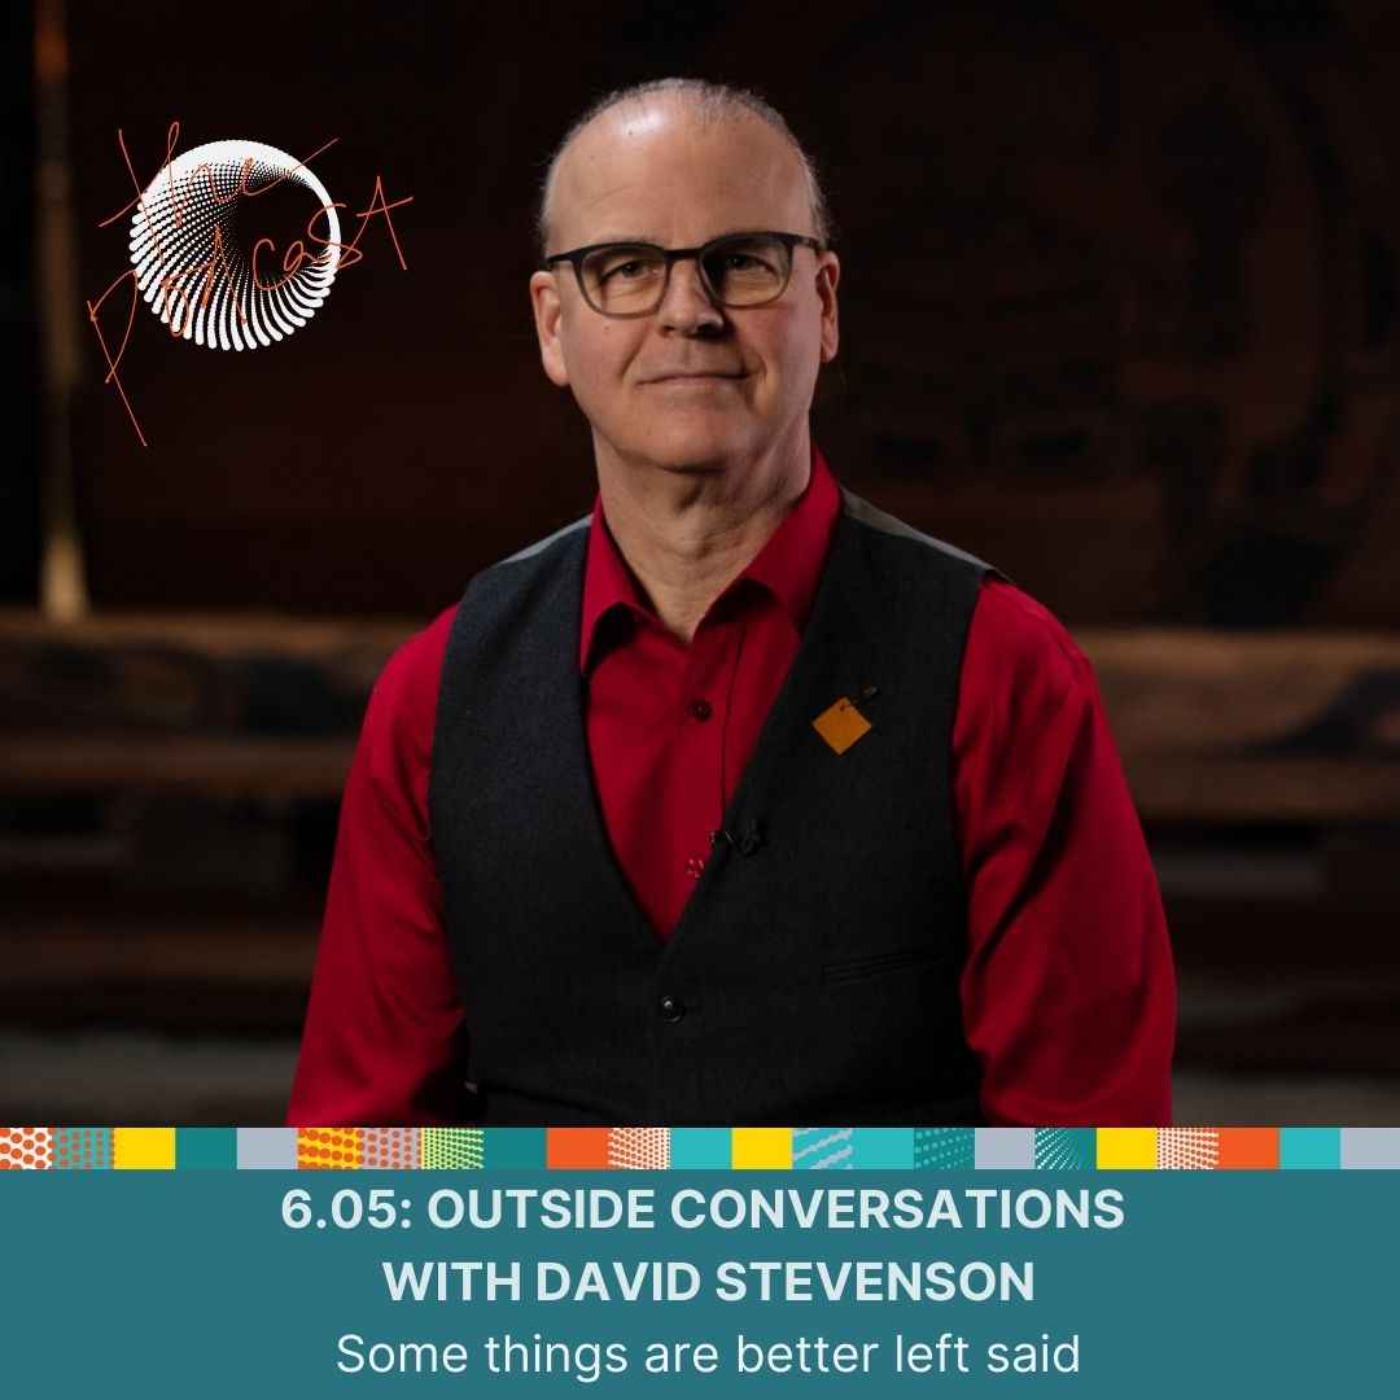 6.05: Outside Conversations with David Stevenson